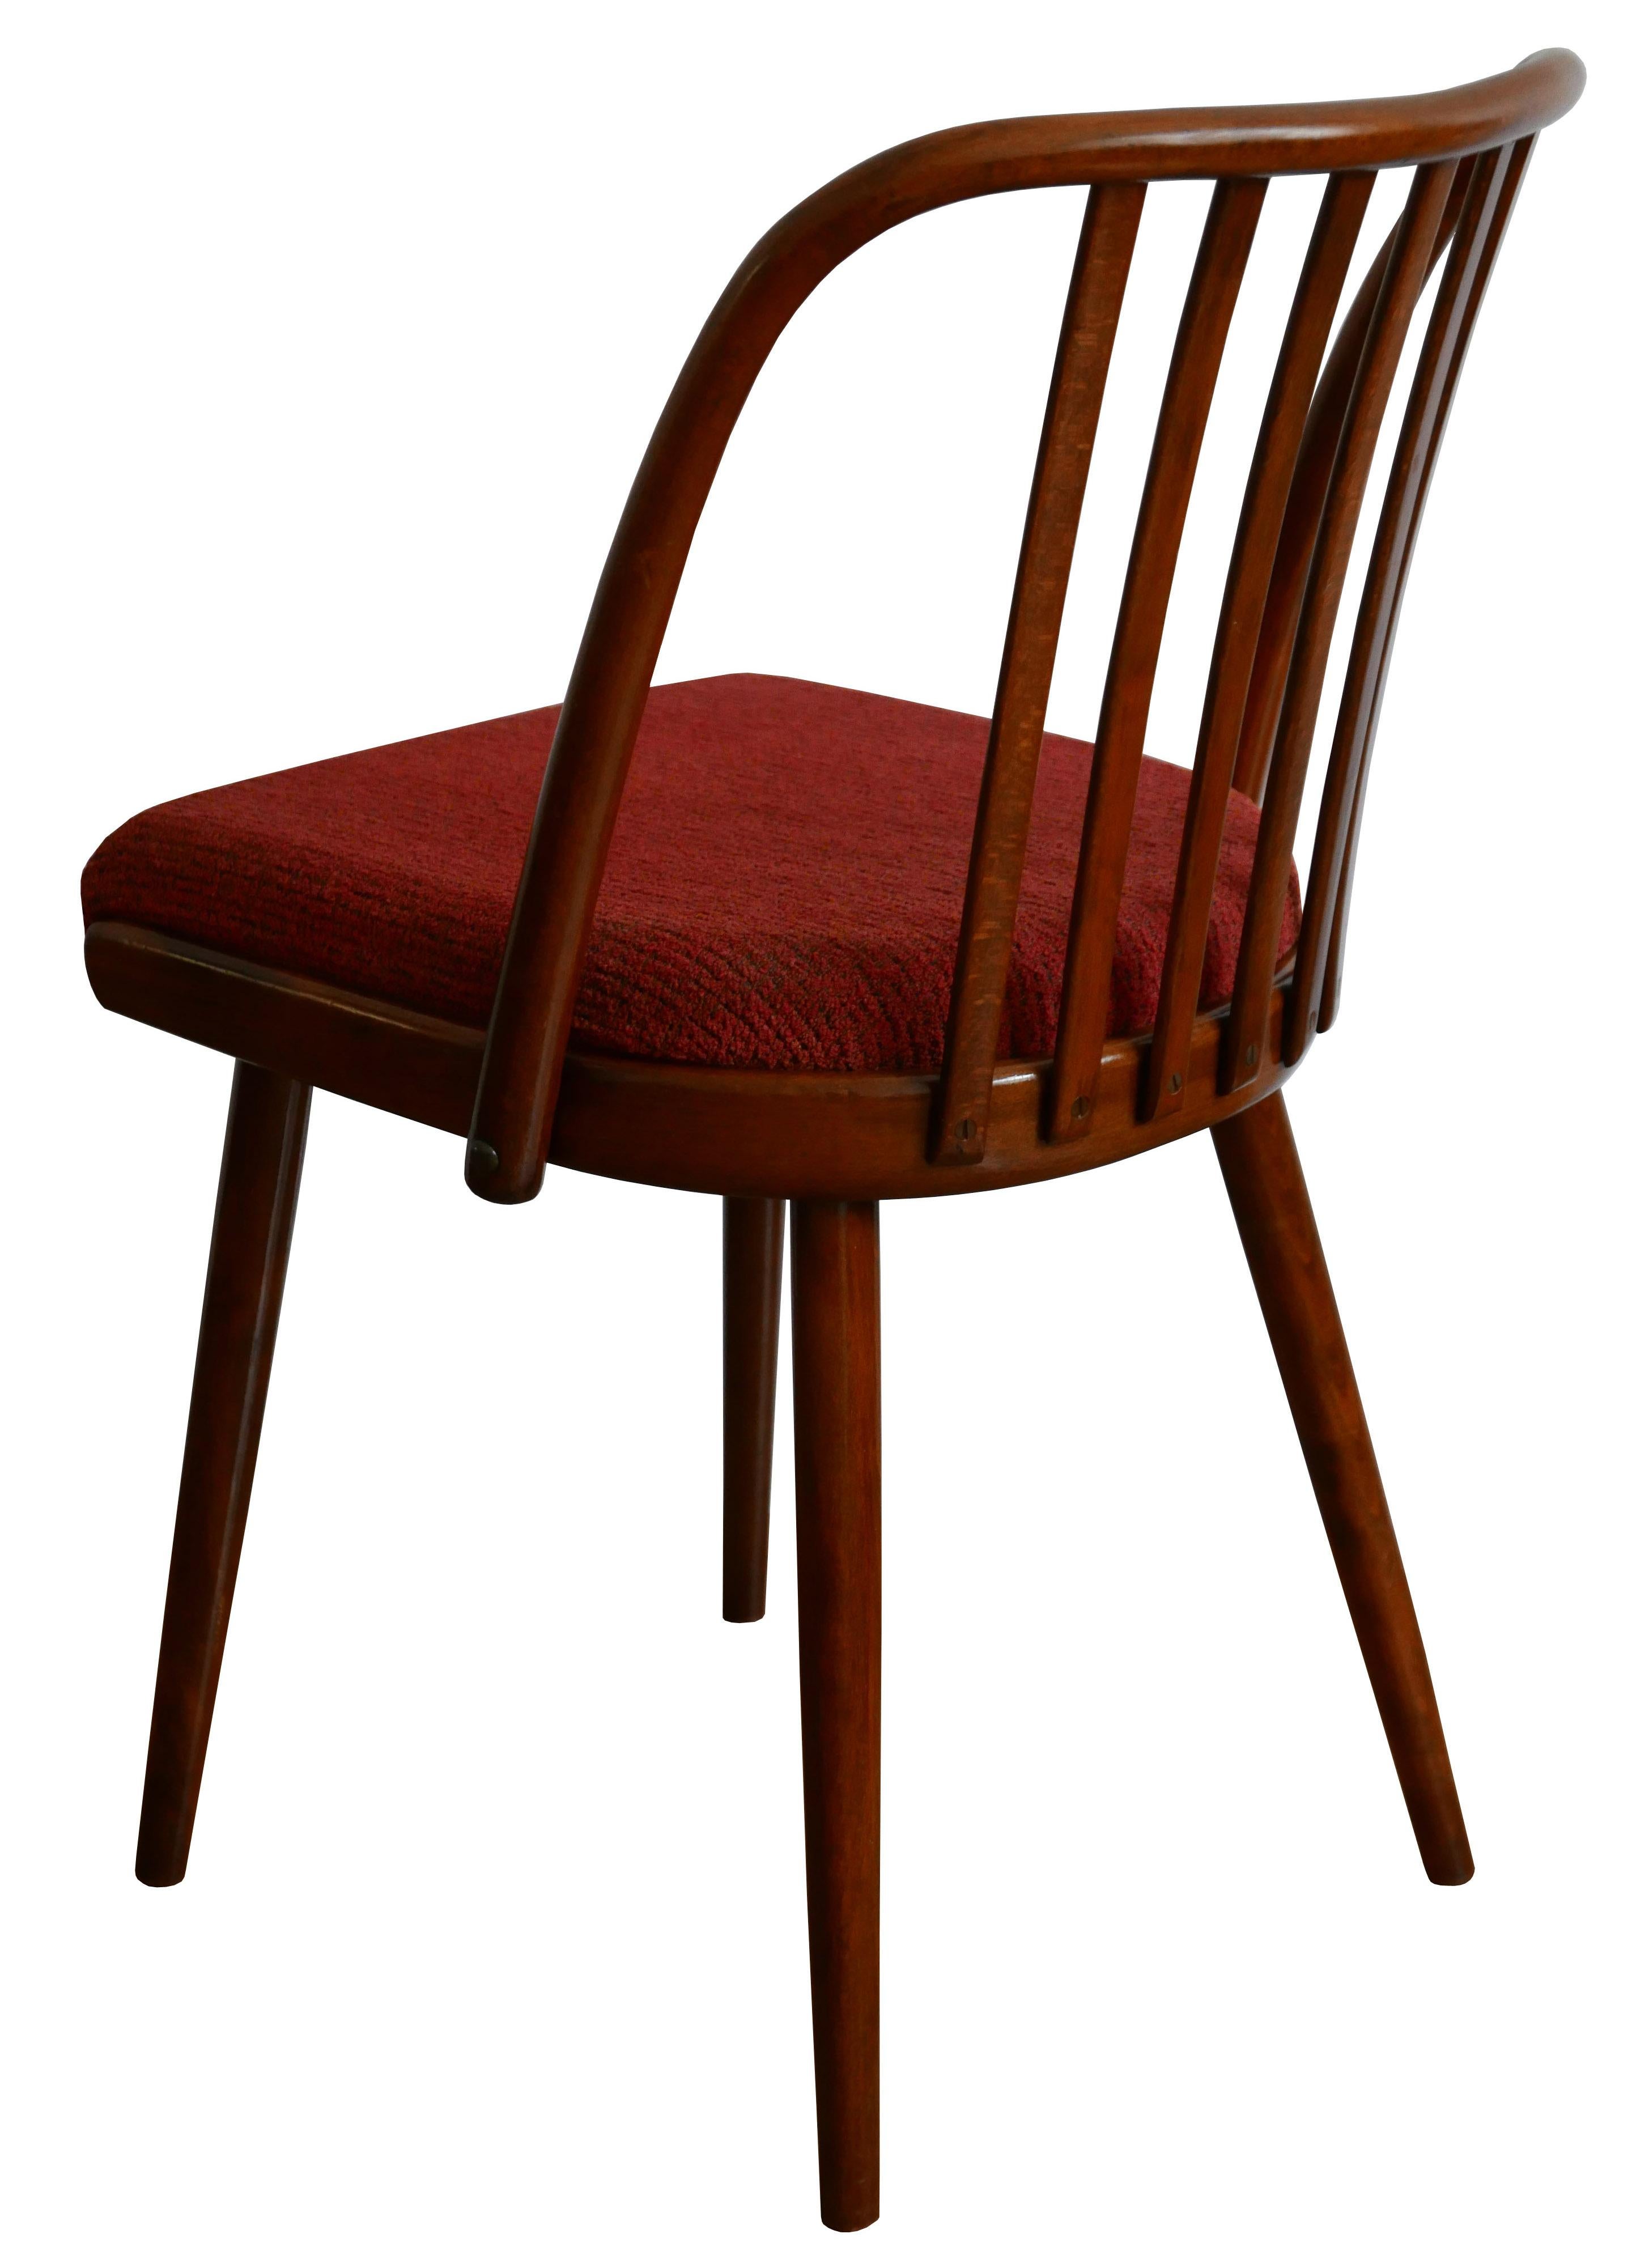 This is a very rare set of six U -300 dining chairs in perfect original condition. They were made by Jinota Sobeslav in Czechoslovakia specially for the market in the former Soviet Union. Because of that these chairs were made to a higher quality